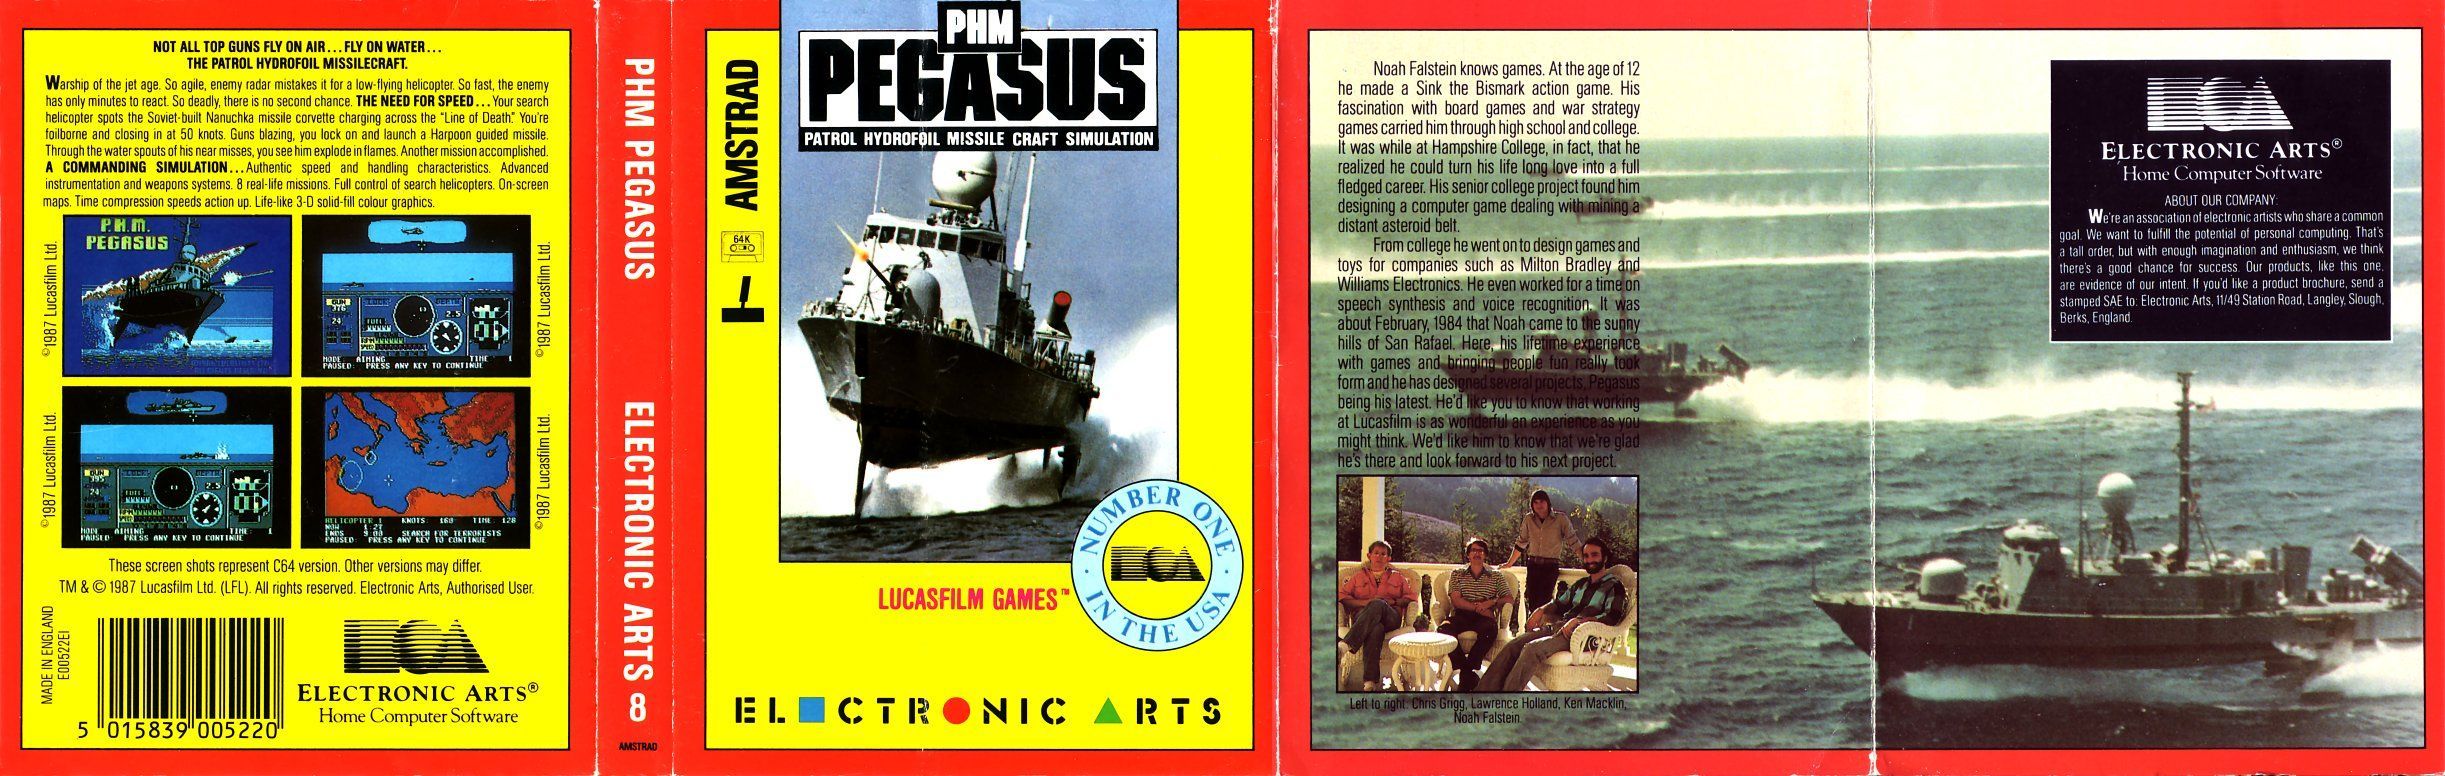 cover of the Amstrad CPC game phm_pegasus by Mig